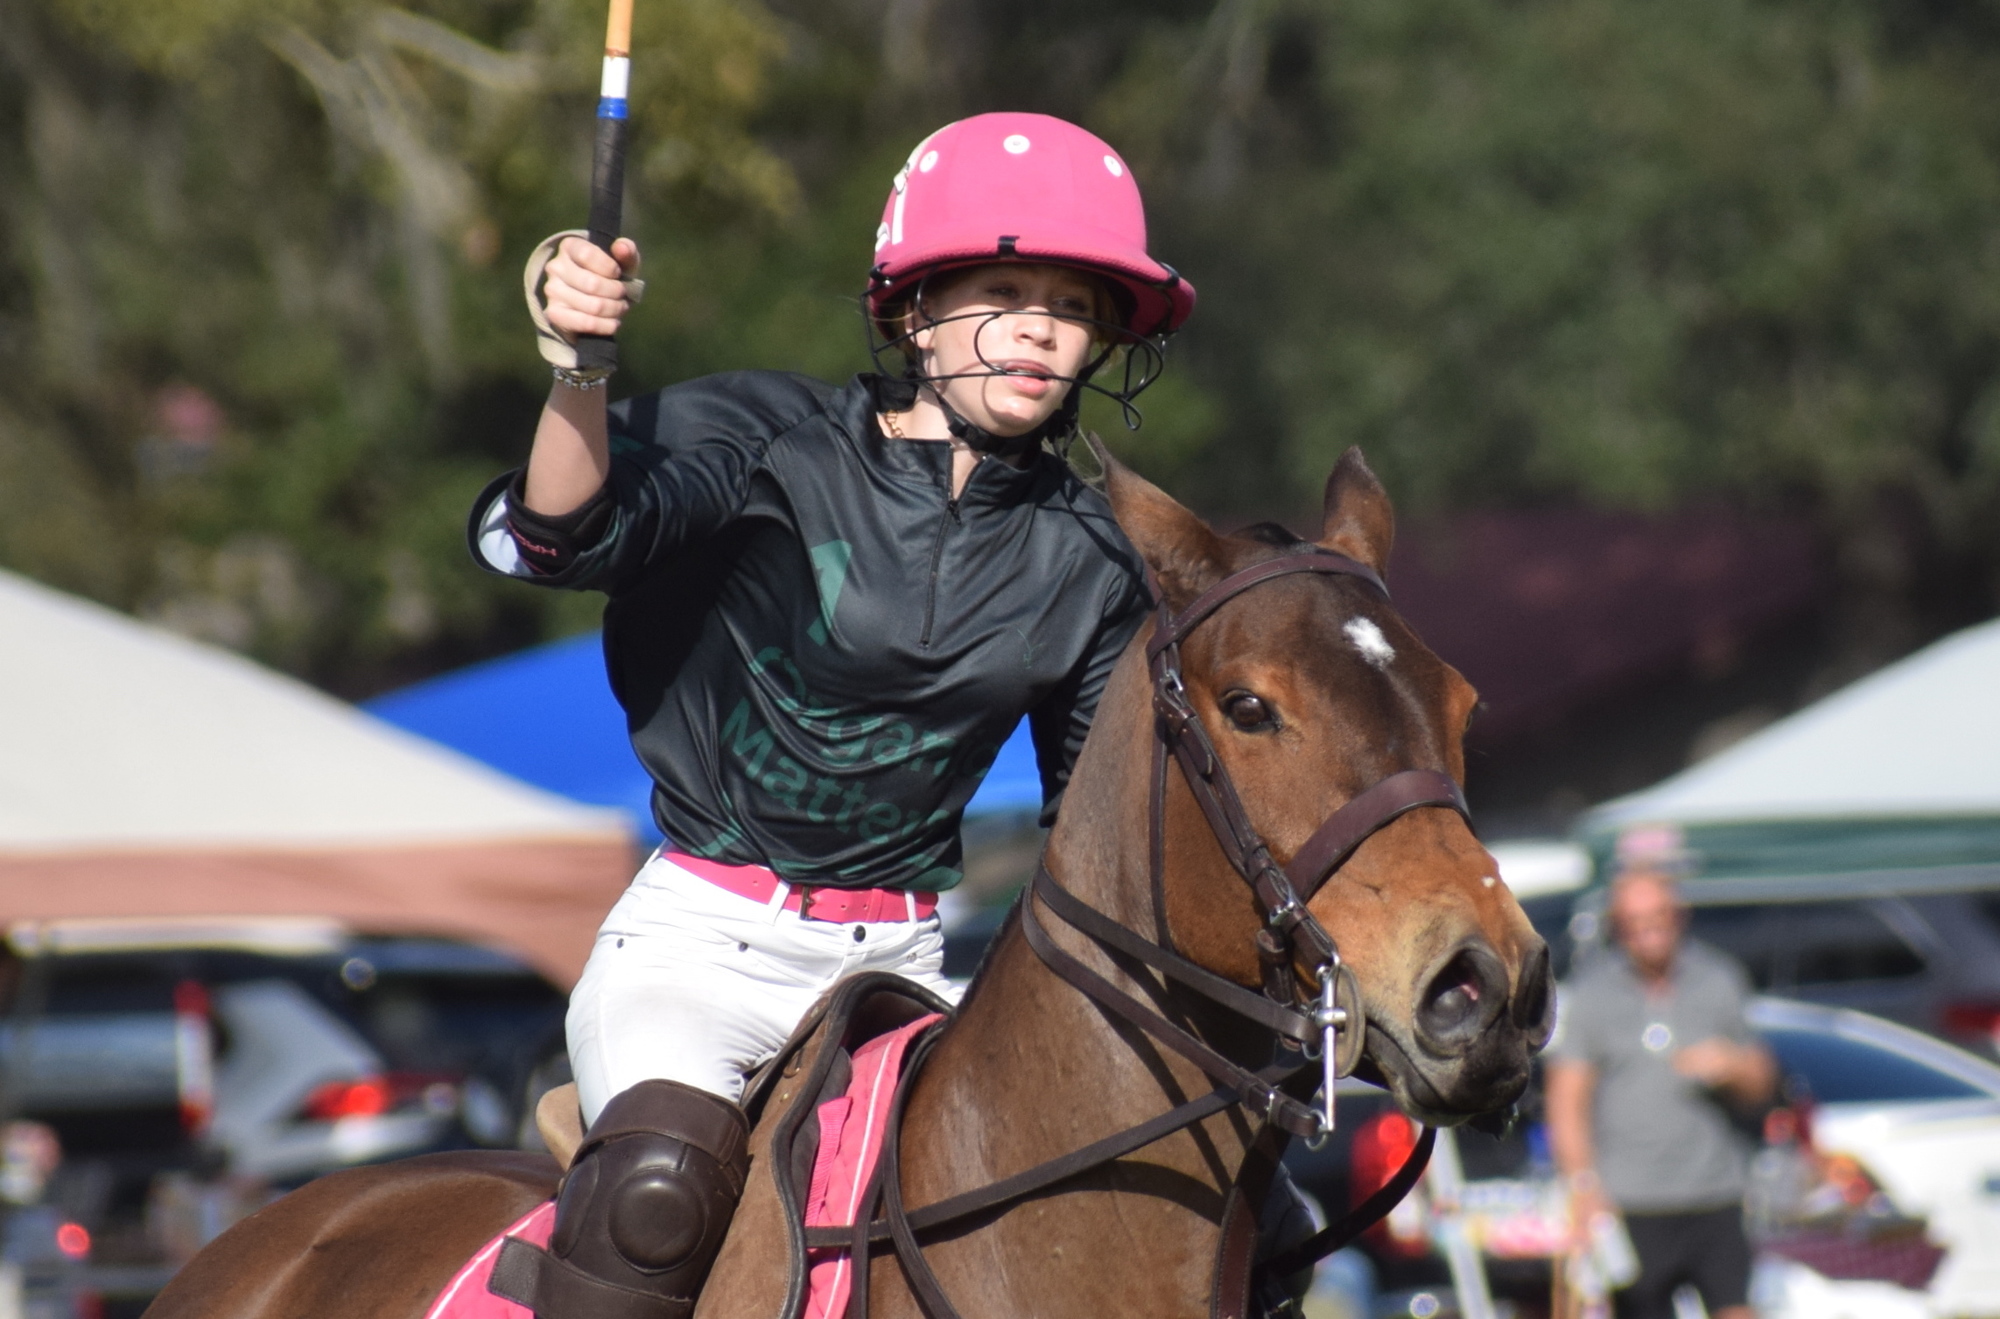 Hanna Hornung, 13, has played twice in Sunday feature matches at the Sarasota Polo Club, including this one Jan. 2.